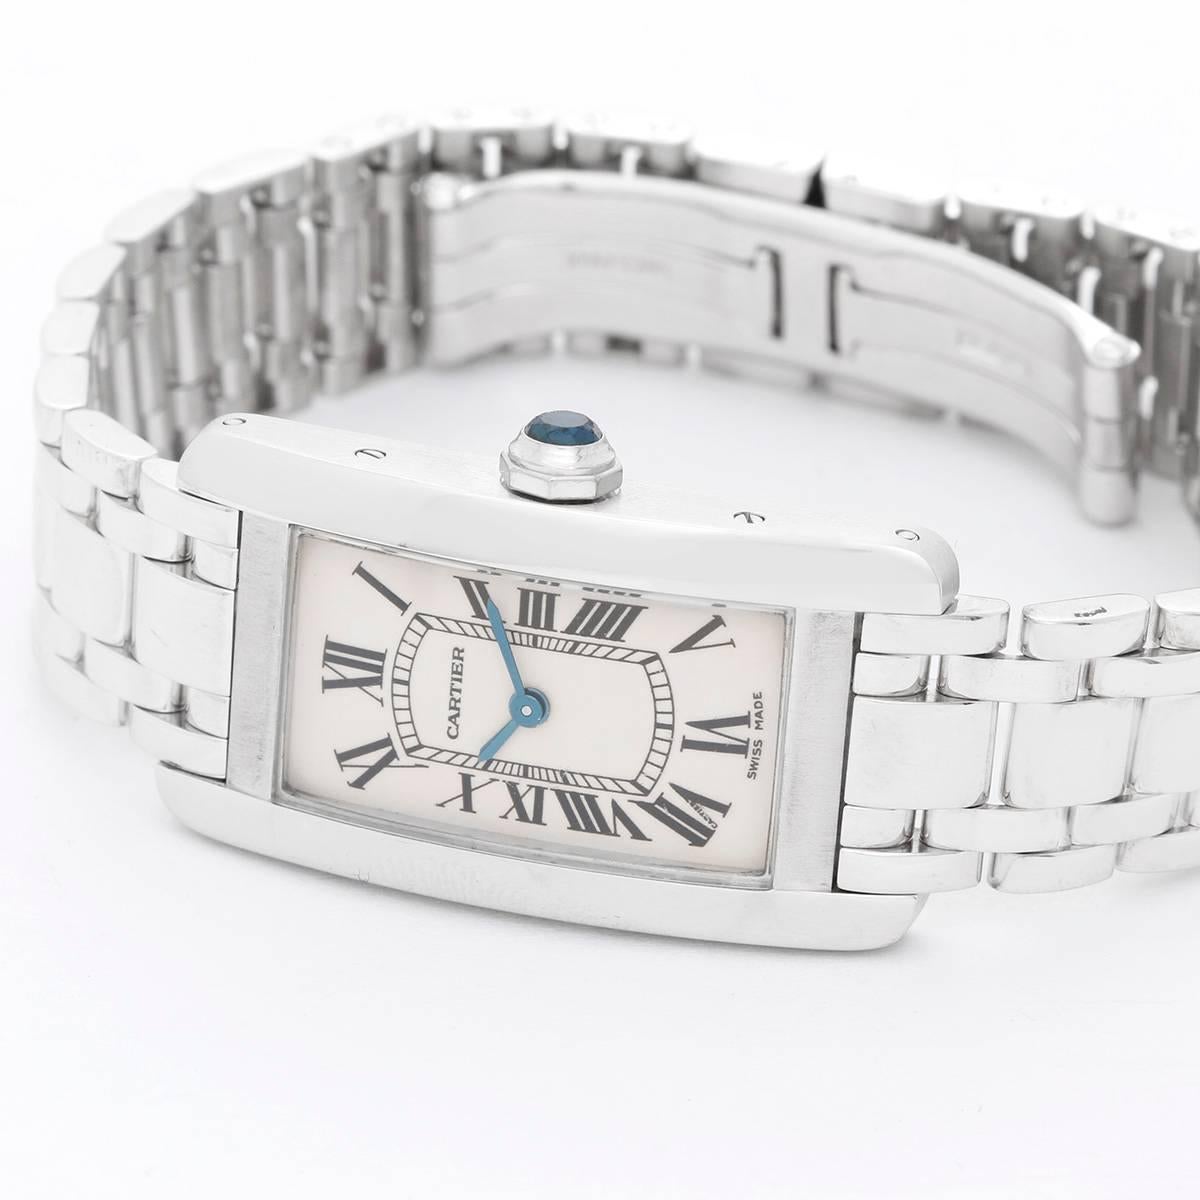 Cartier Tank Americaine Ladies White Gold W26019L1 -  Quartz movement. 18k white gold case (19mm x 40mm). Ivory colored with black Roman numerals. 18k white gold Cartier bracelet with deployant clasp. (Will fit apx. 6-1/2-in. wrist). Pre-owned with